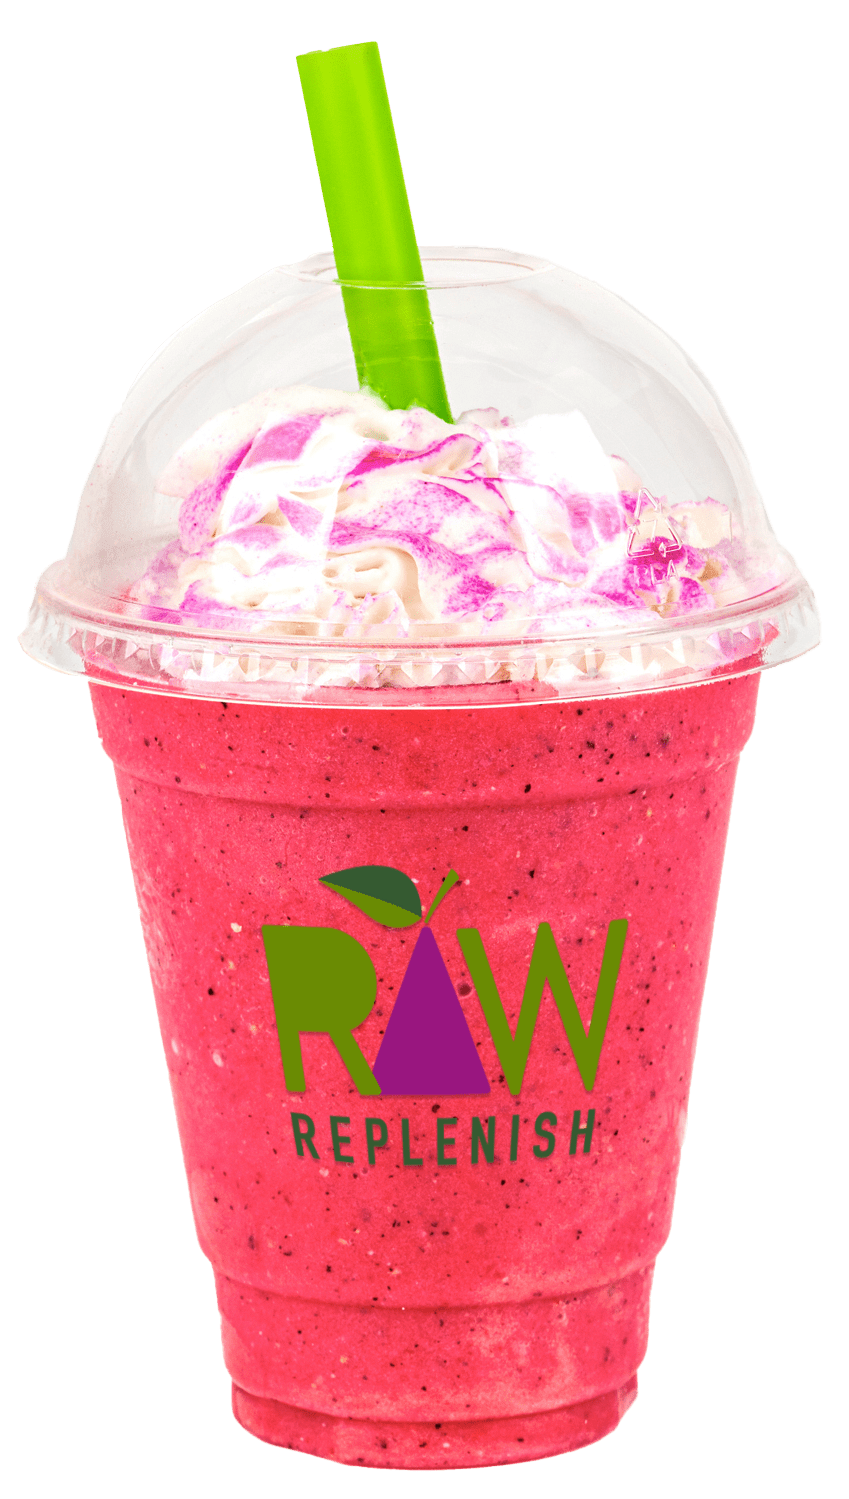 Smoothie franchise image of smoothie with topping